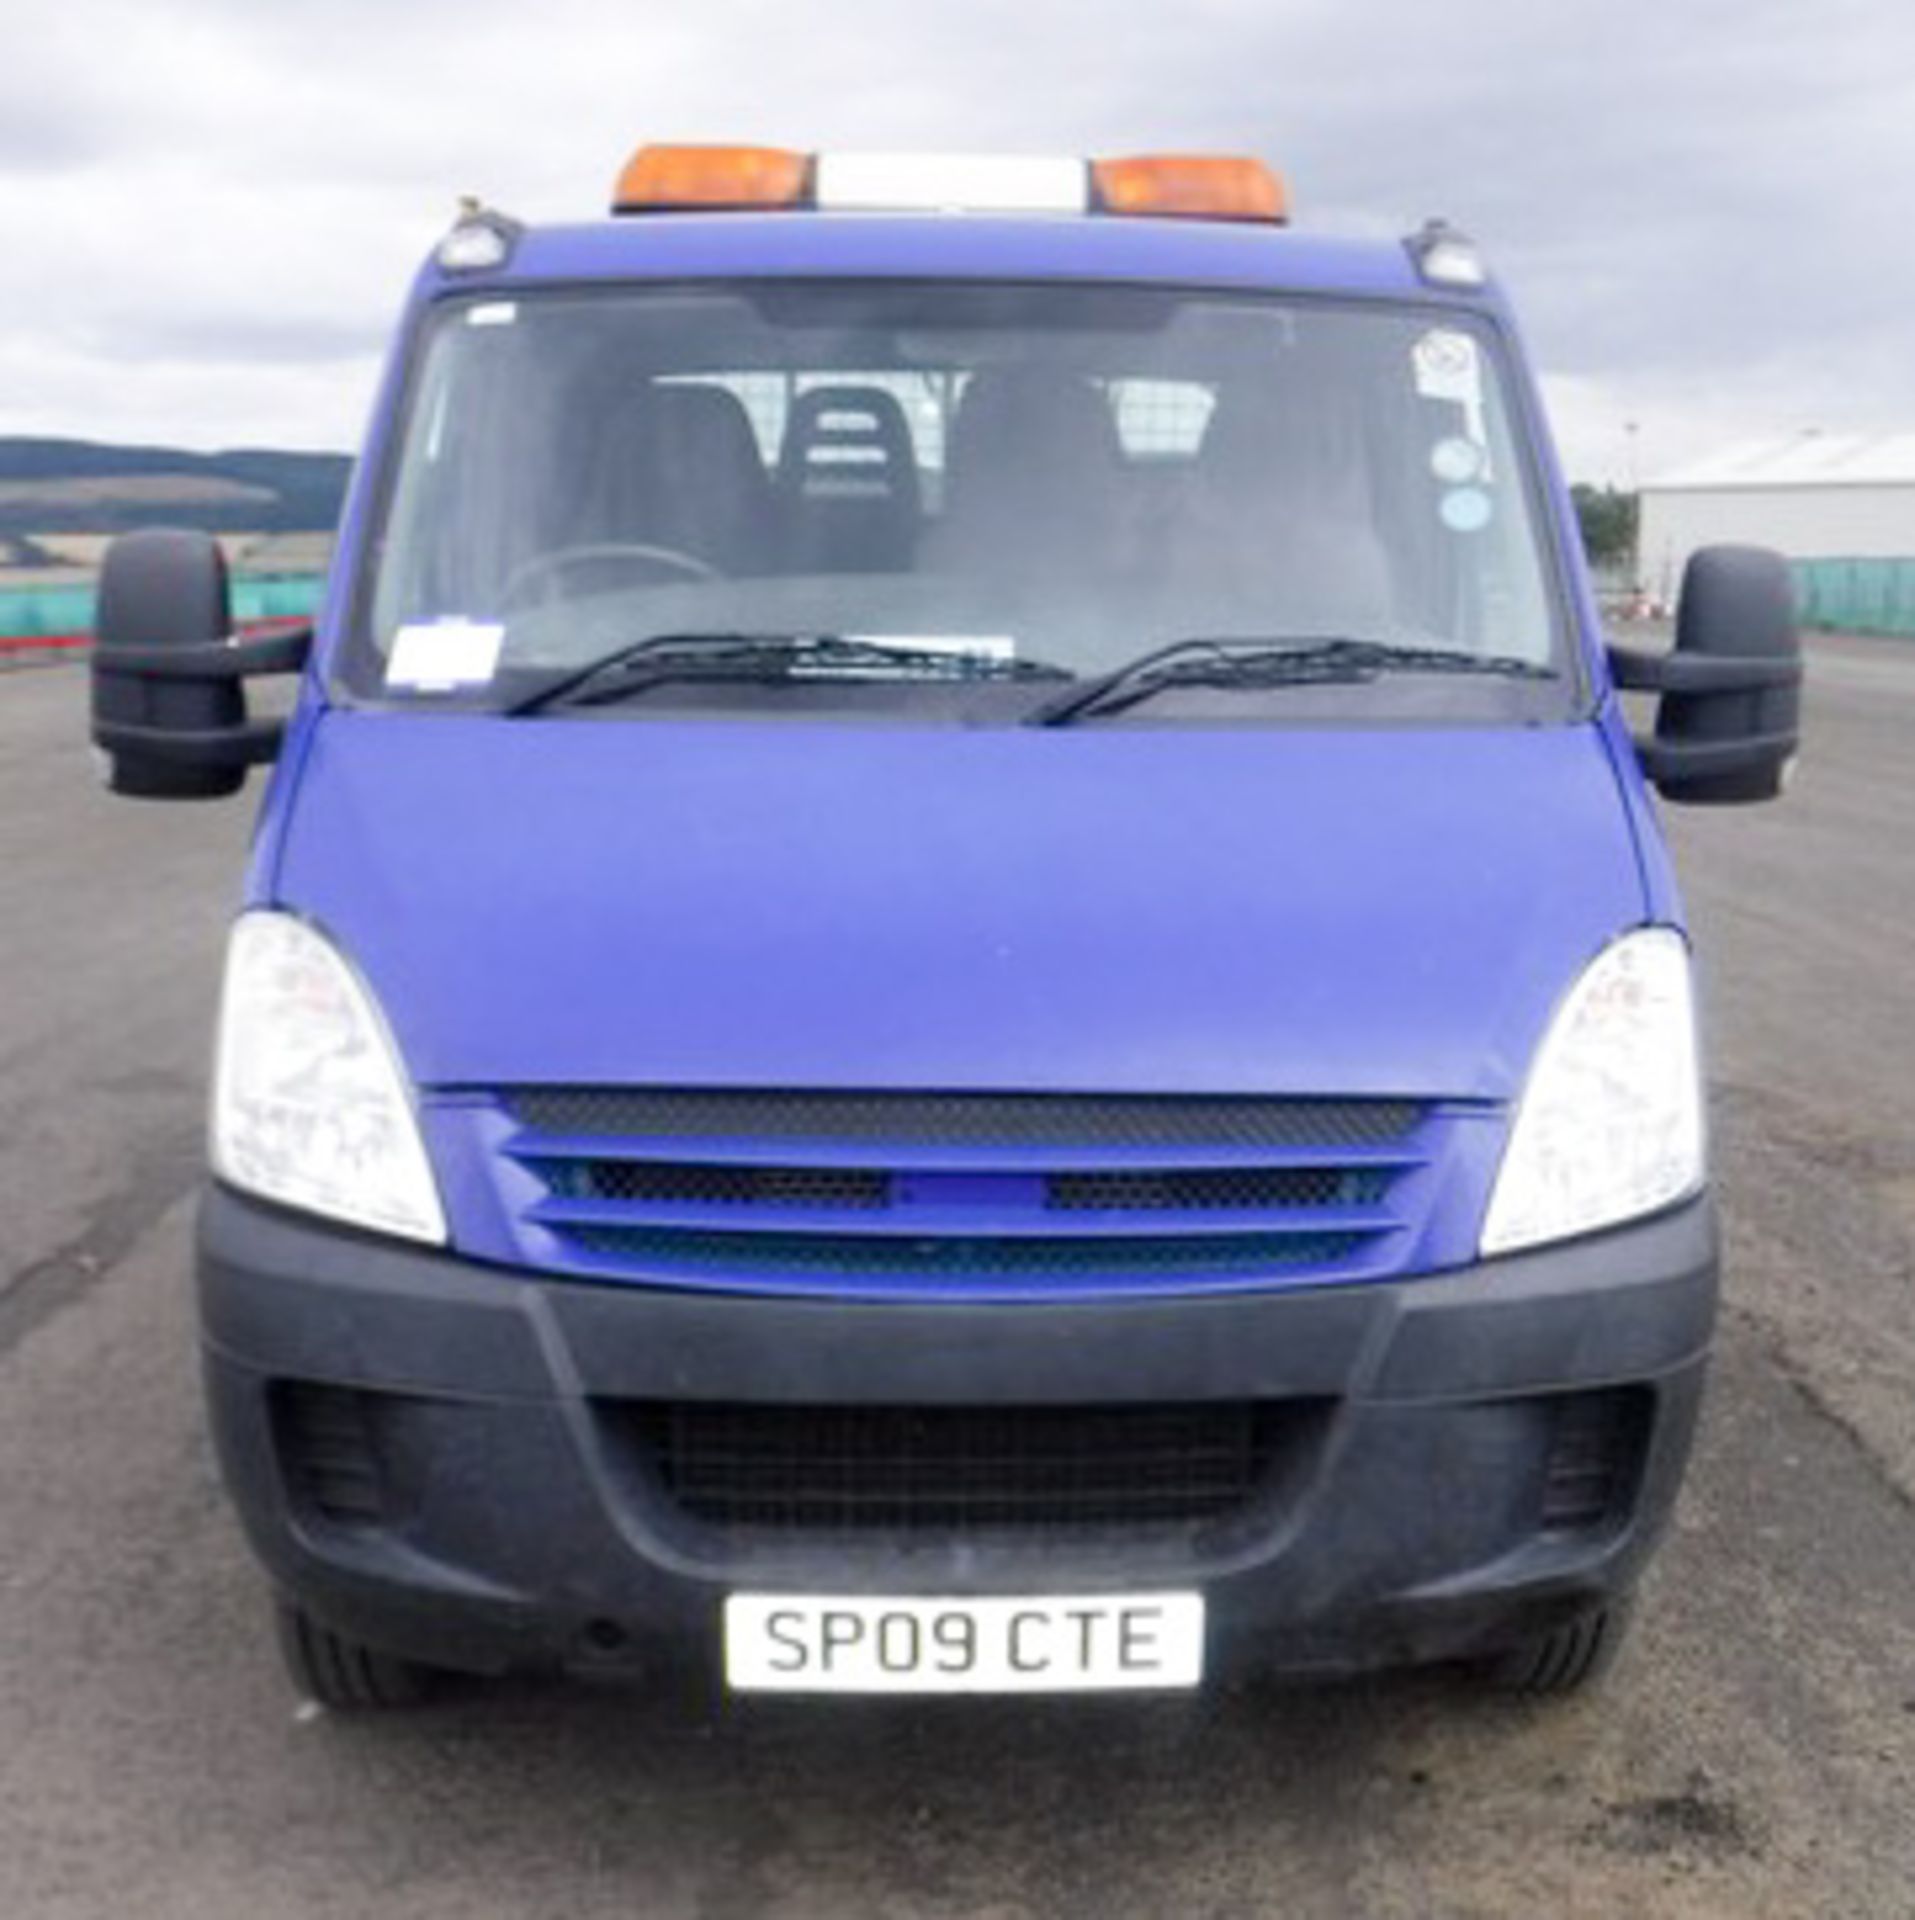 IVECO DAILY 50C15 - 2998cc - Image 12 of 20